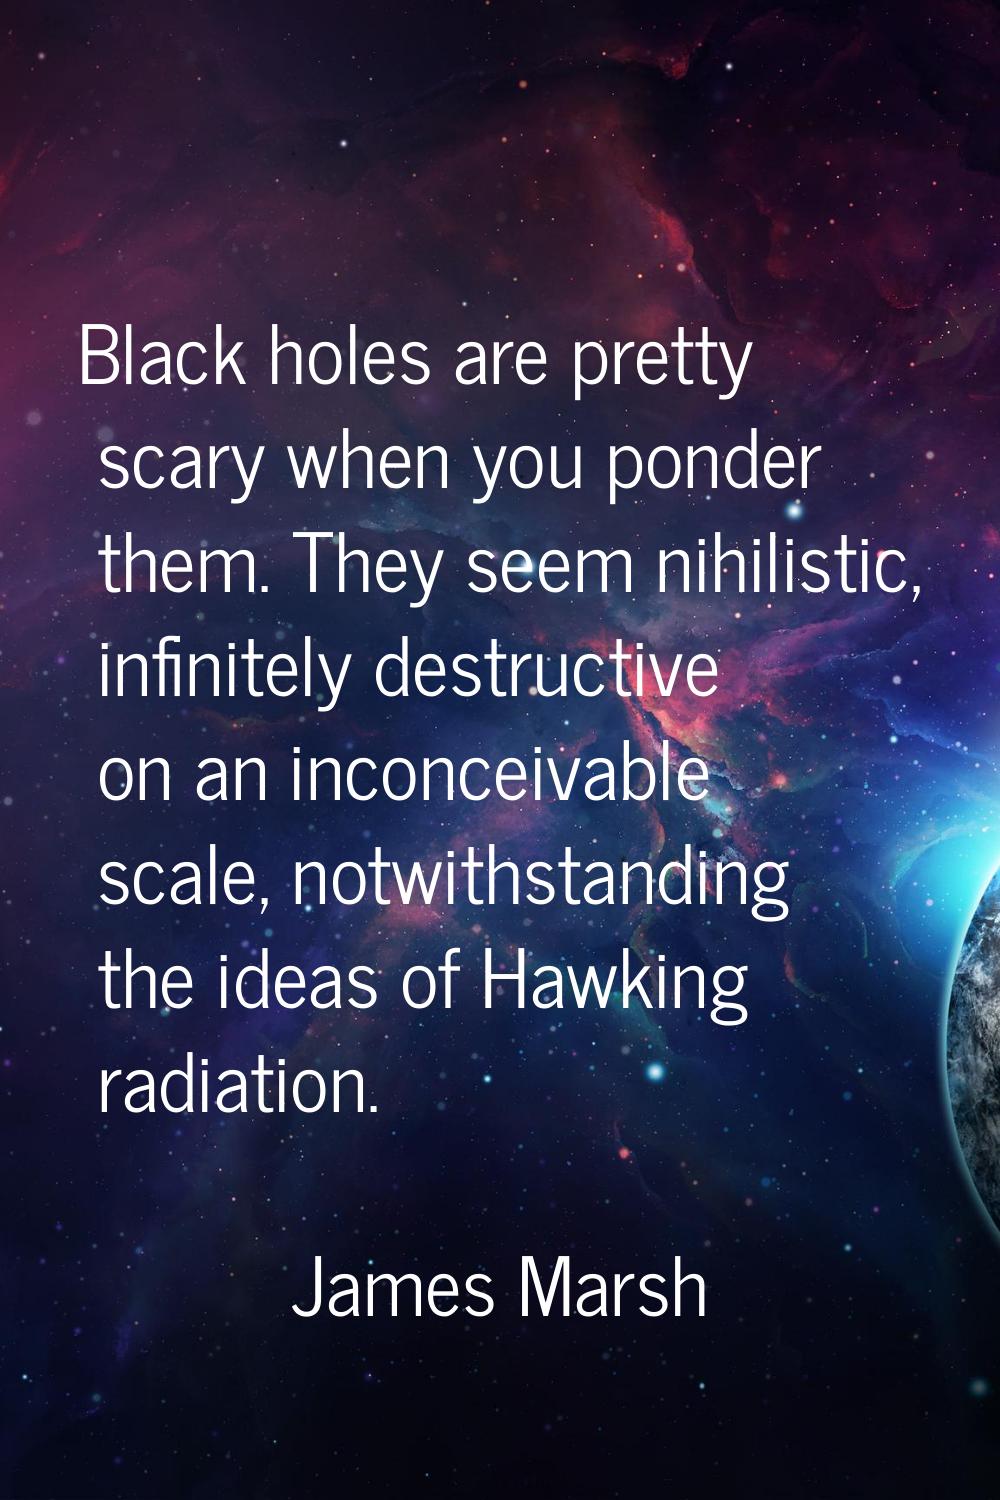 Black holes are pretty scary when you ponder them. They seem nihilistic, infinitely destructive on 